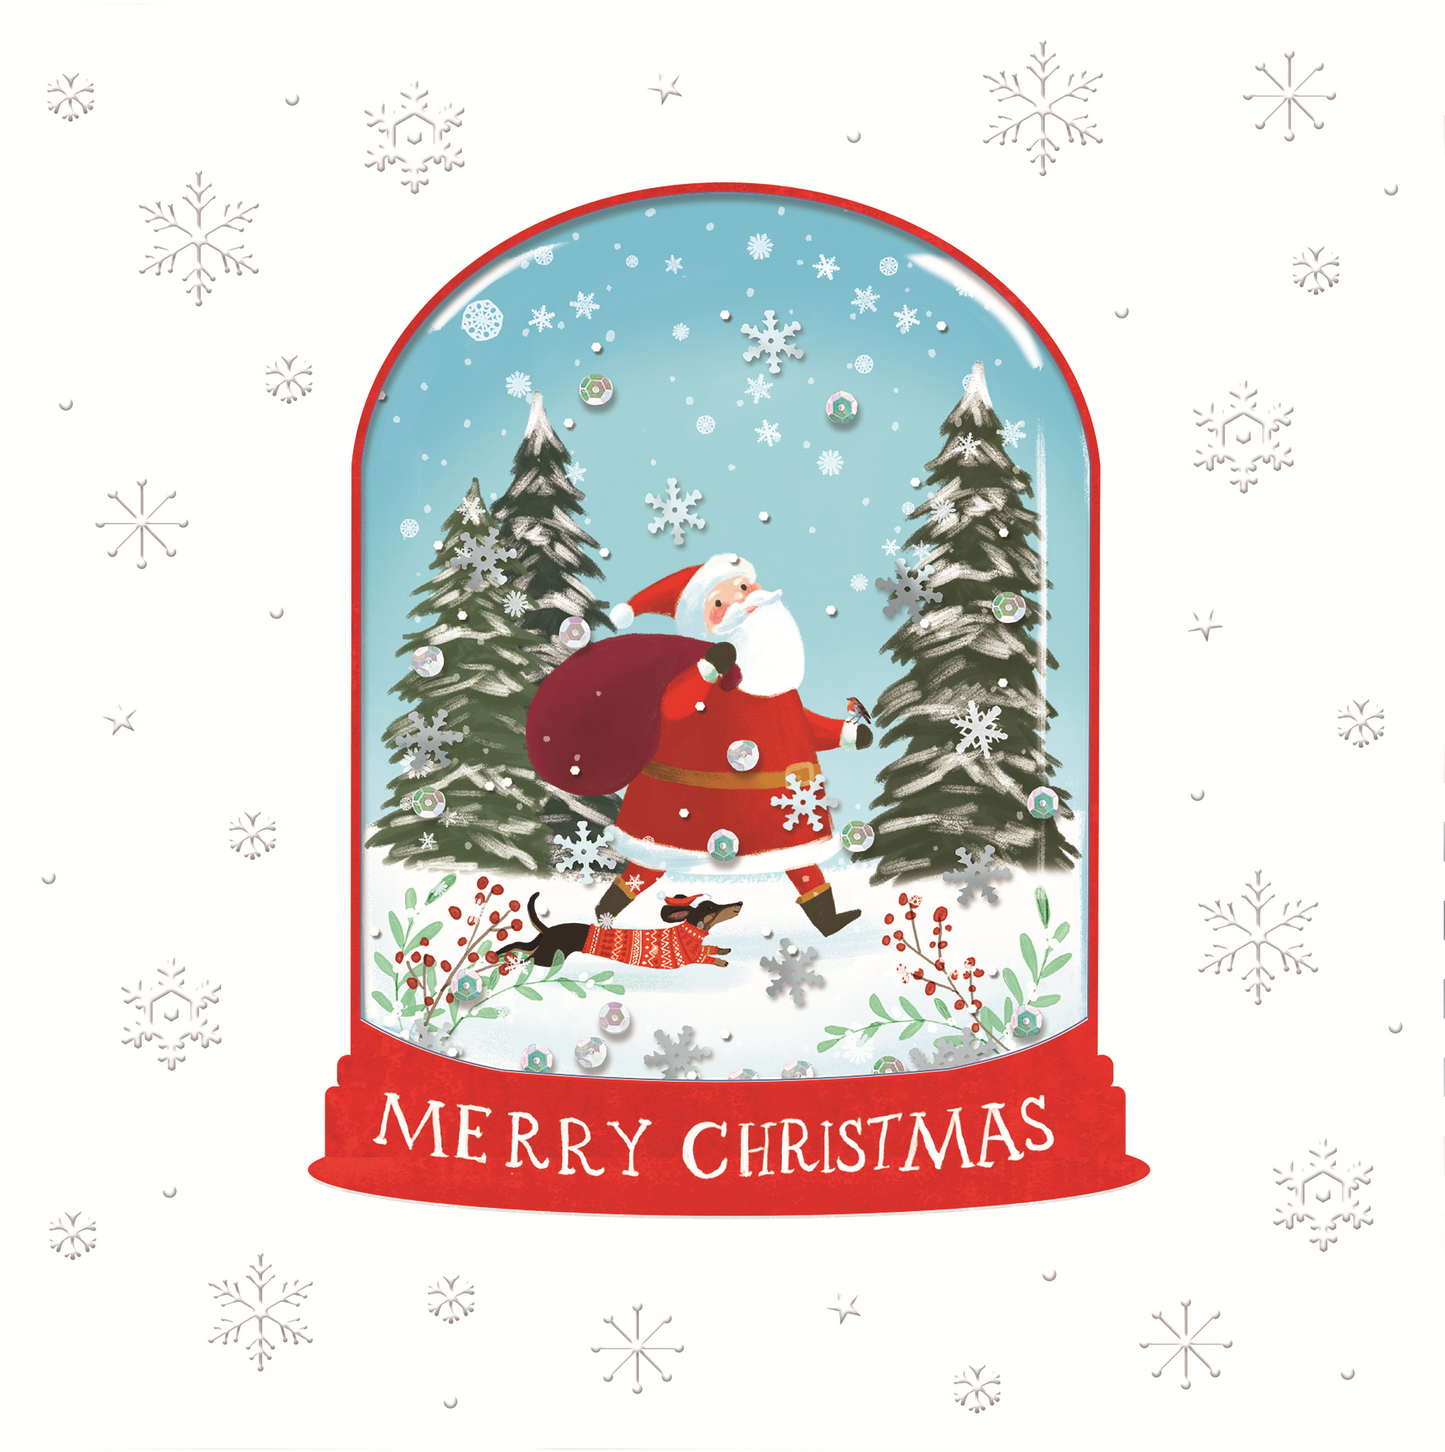 Box of 5 Snowglobe Style RSPCA Charity Christmas Cards